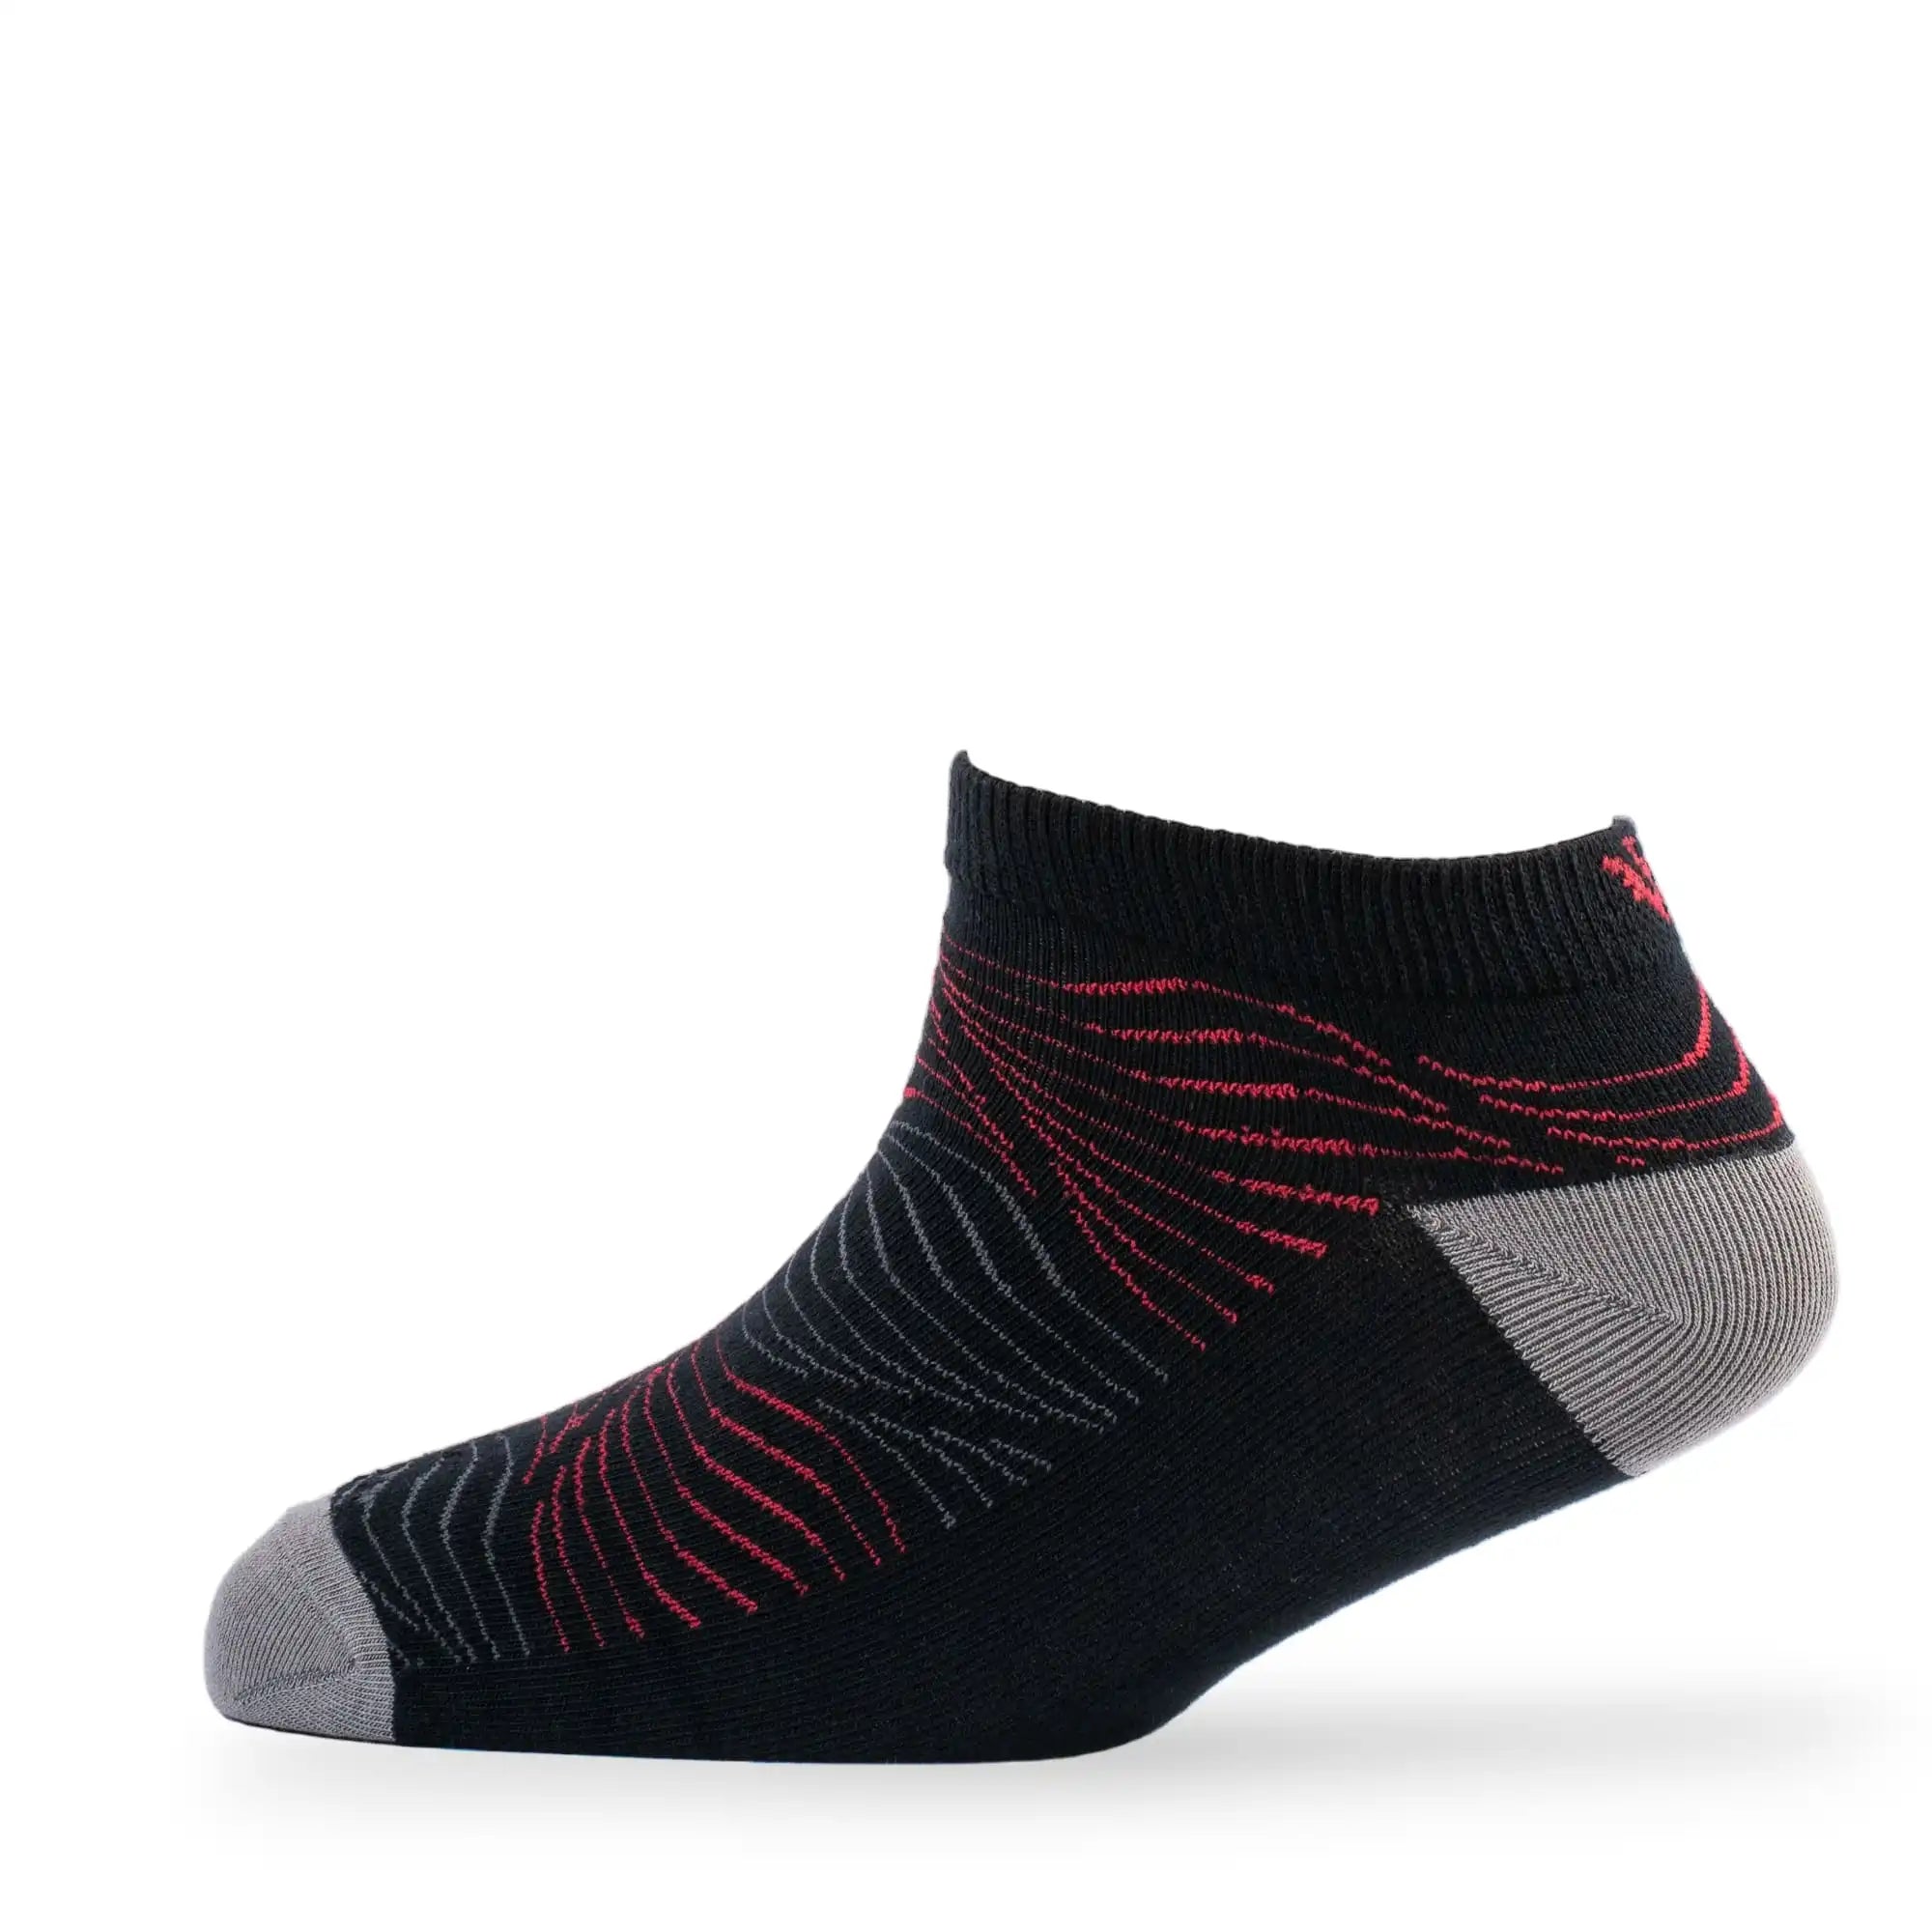 Young Wings Men's Multi Colour Cotton Fabric Design Low Ankle Length Socks - Pack of 5, Style no. 1711-M1